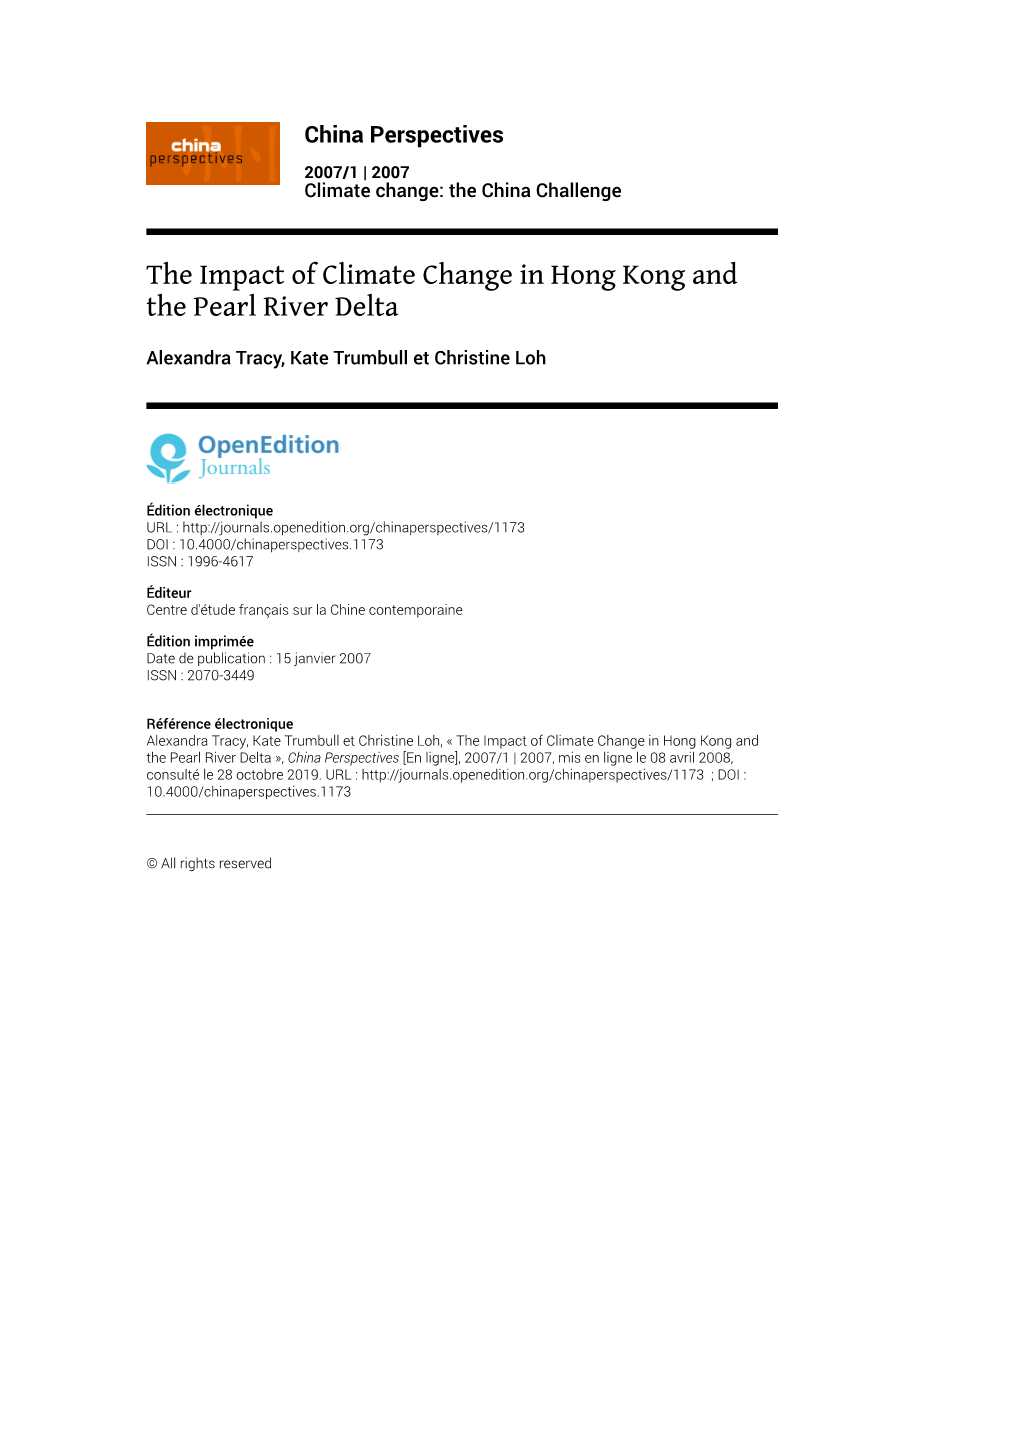 The Impact of Climate Change in Hong Kong and the Pearl River Delta